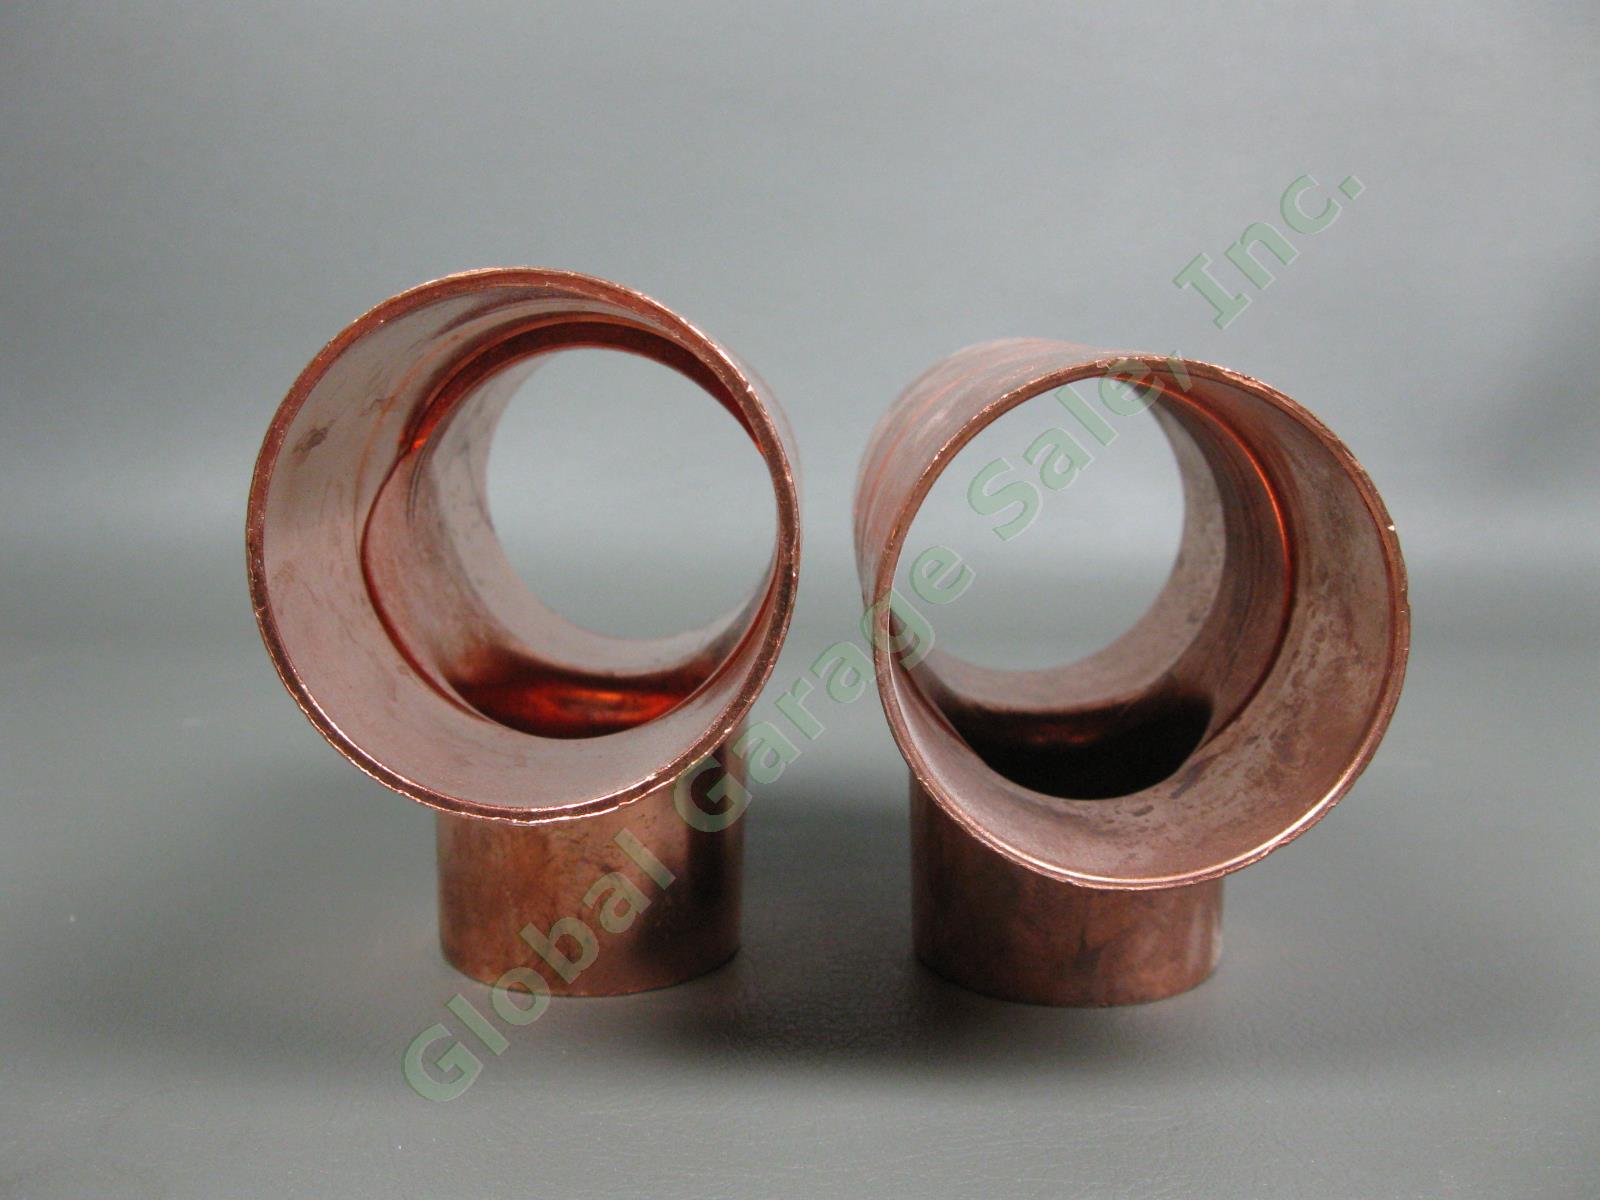 2 NEW Nibco 2" x 2" x 1-1/2" Copper EPC Reducing Sweat Tees Pipe Fittings Pair 2